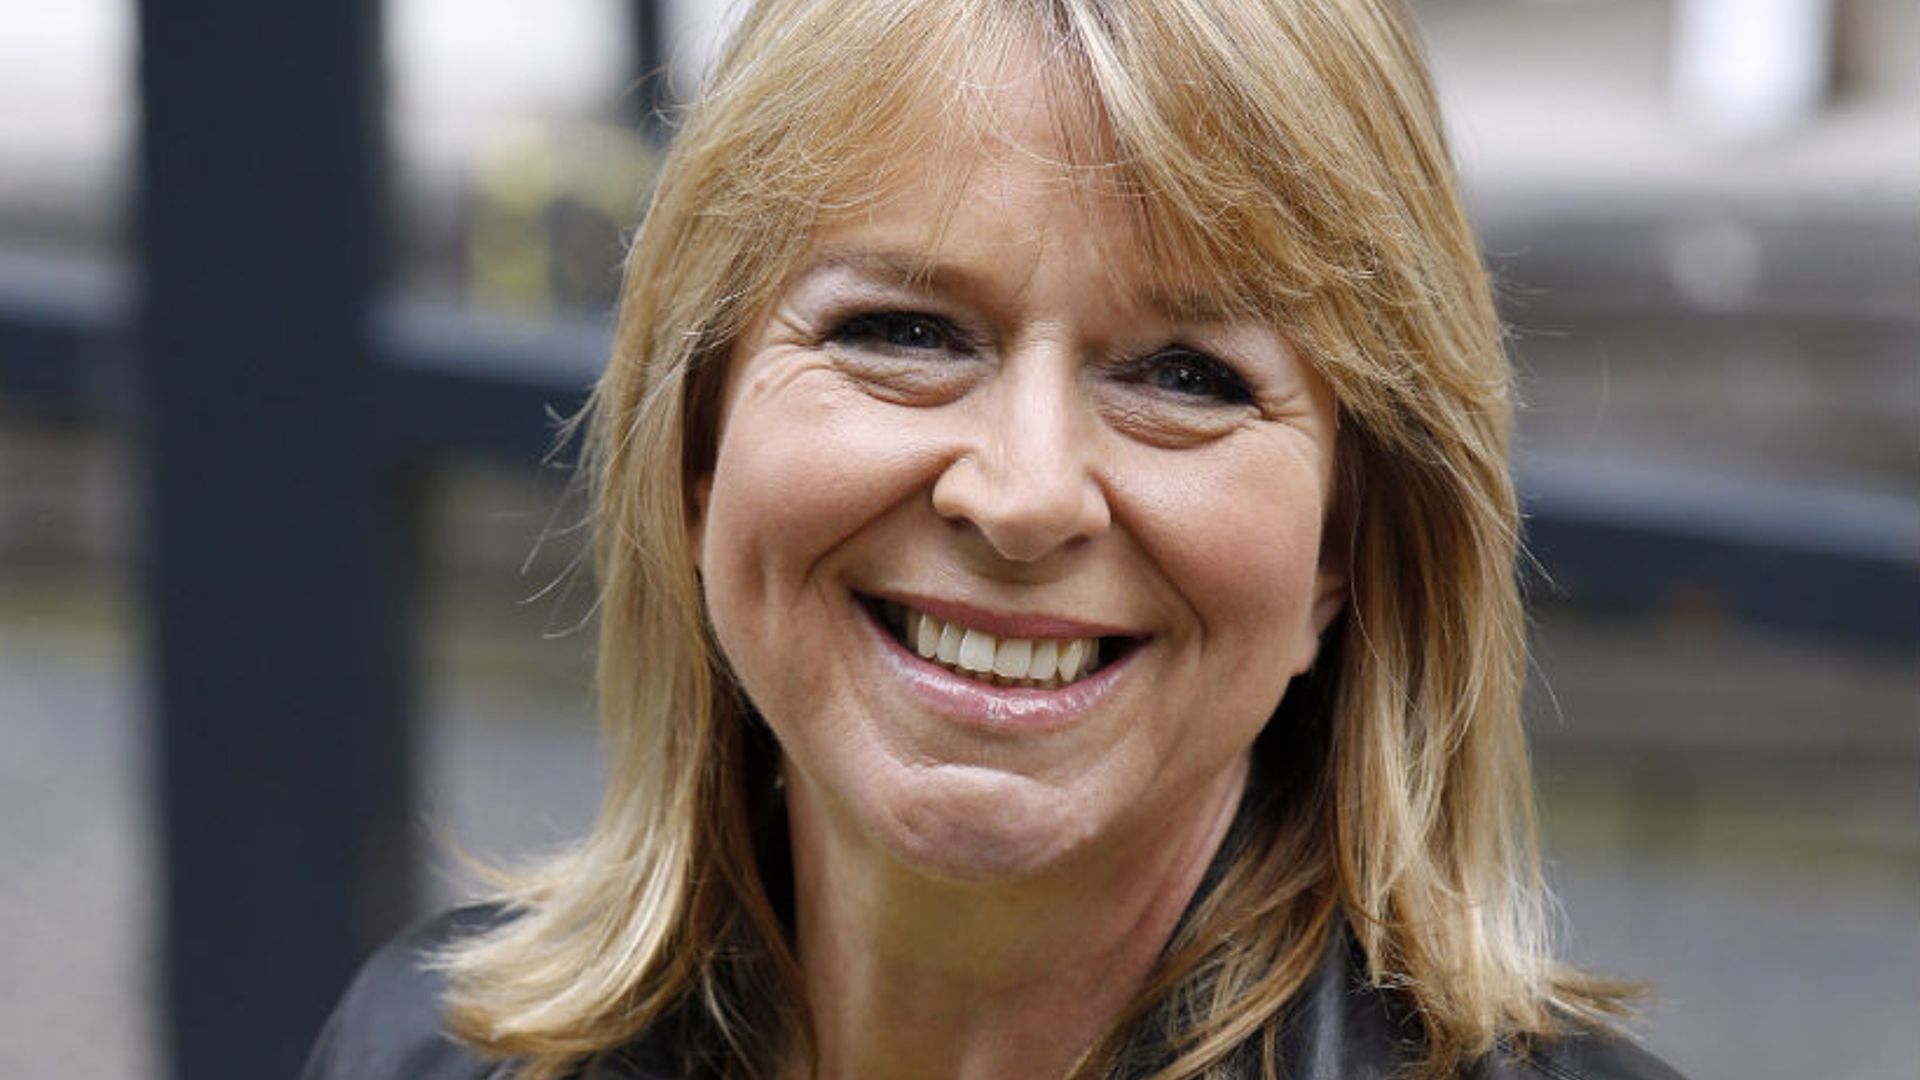 Fern Britton is coming back to This Morning – find out the details